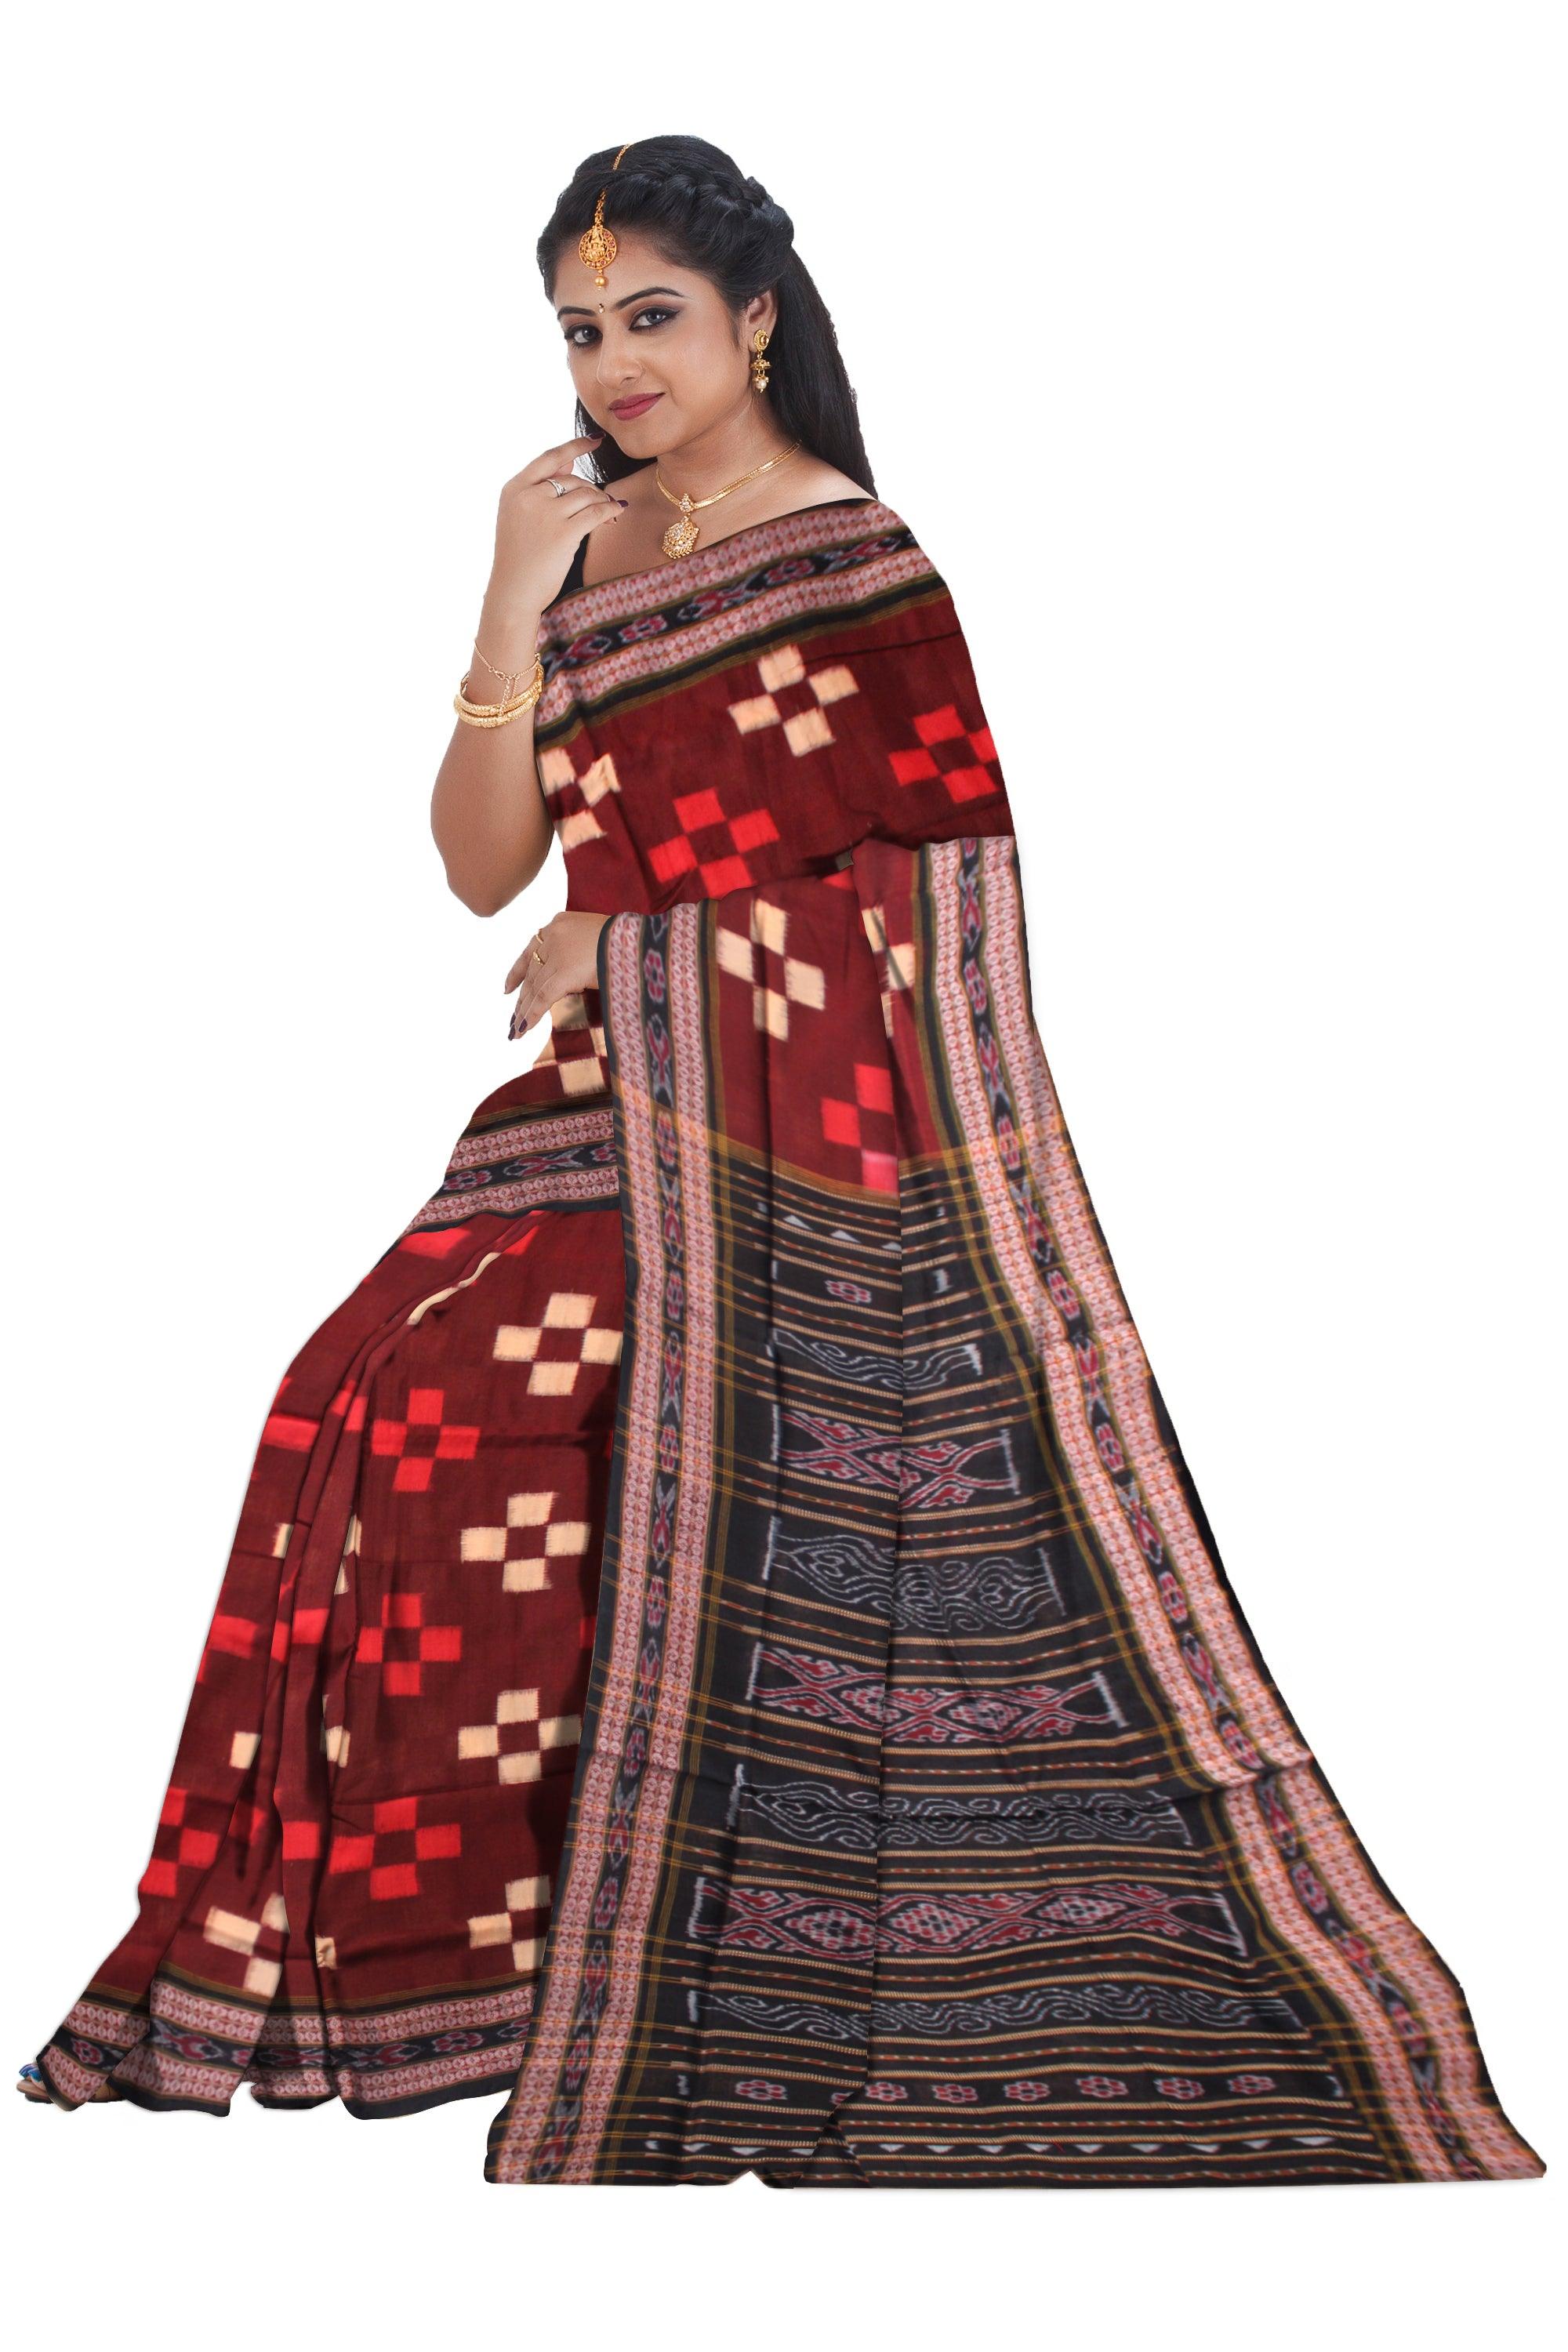 FESTIVAL COLLECTION PASAPALI COTTON SAREE IN MAROON AND BLACK COLOR BASE, WITH OUT BLOUSE PIECE. - Koshali Arts & Crafts Enterprise